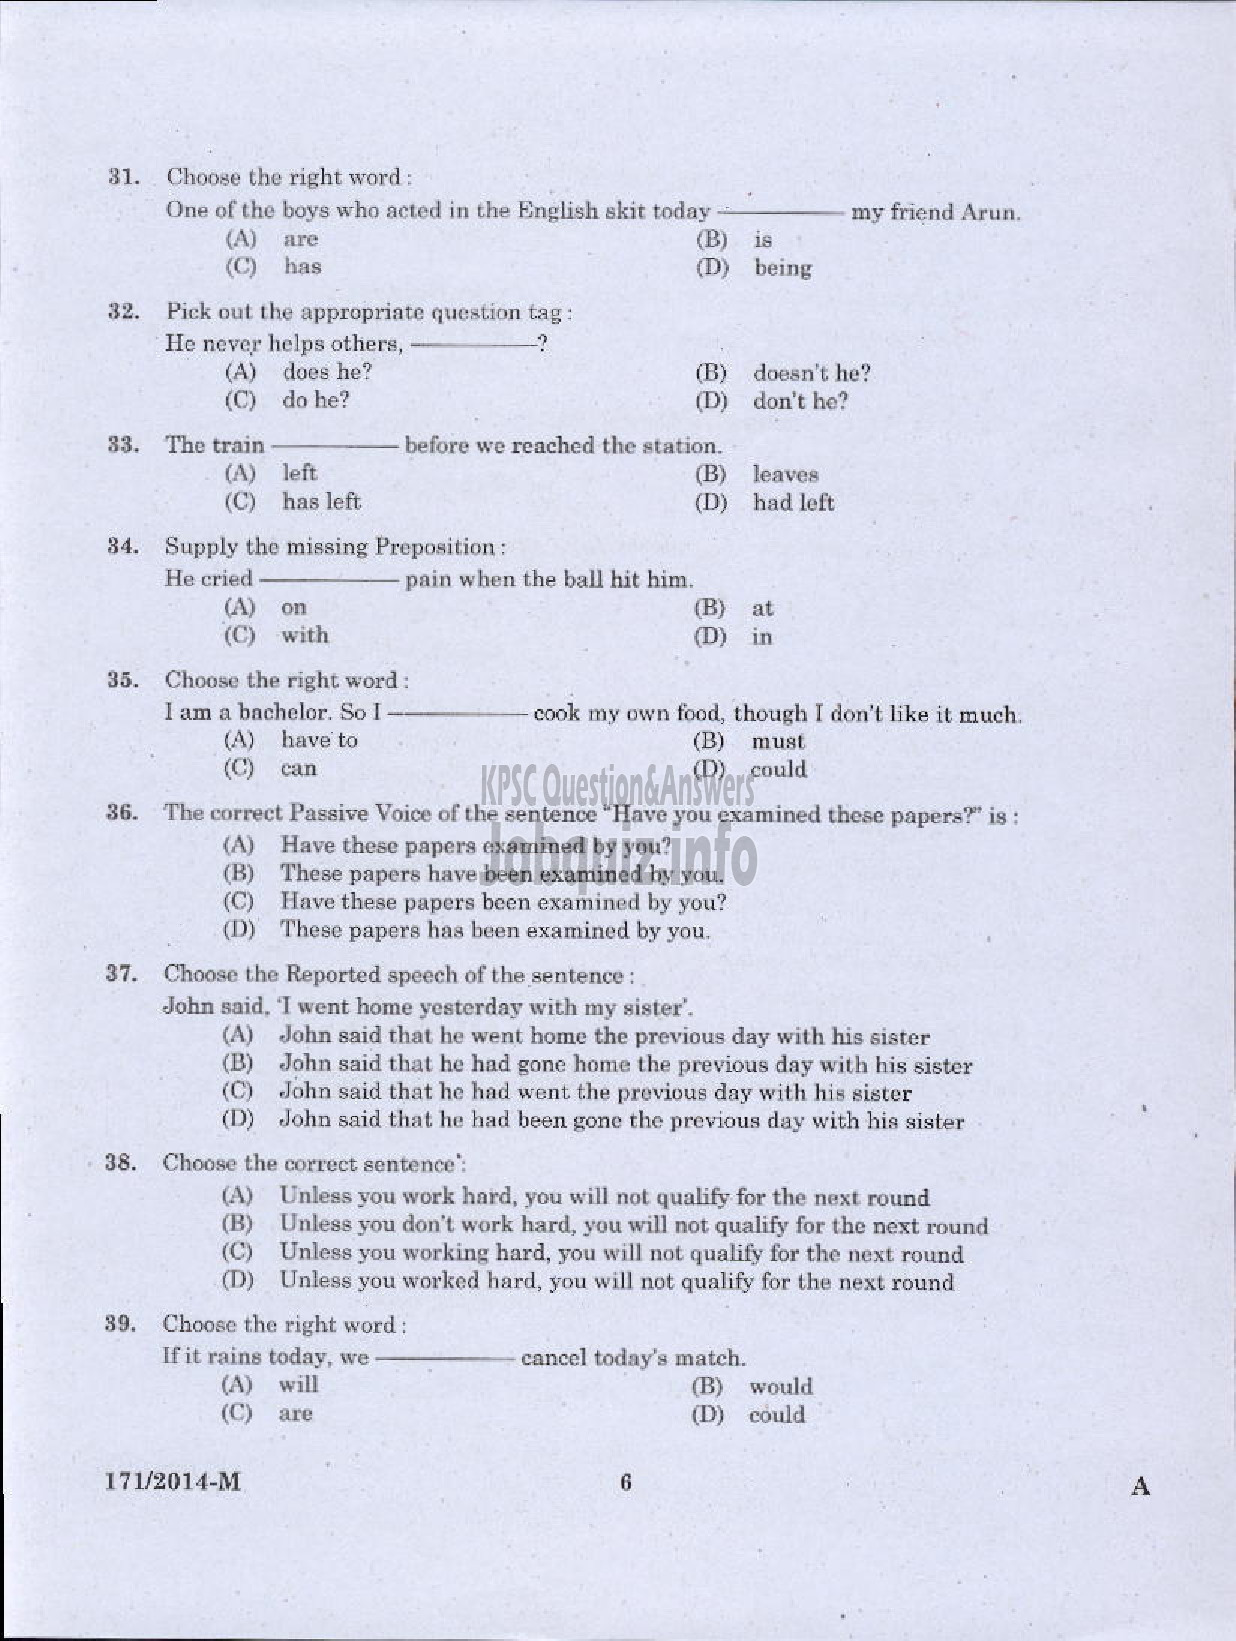 Kerala PSC Question Paper - DRIVER GR II KERALA ELECTRICAL AND ALLIED ENGINEERING COMPANY LTD ( Malayalam ) -4